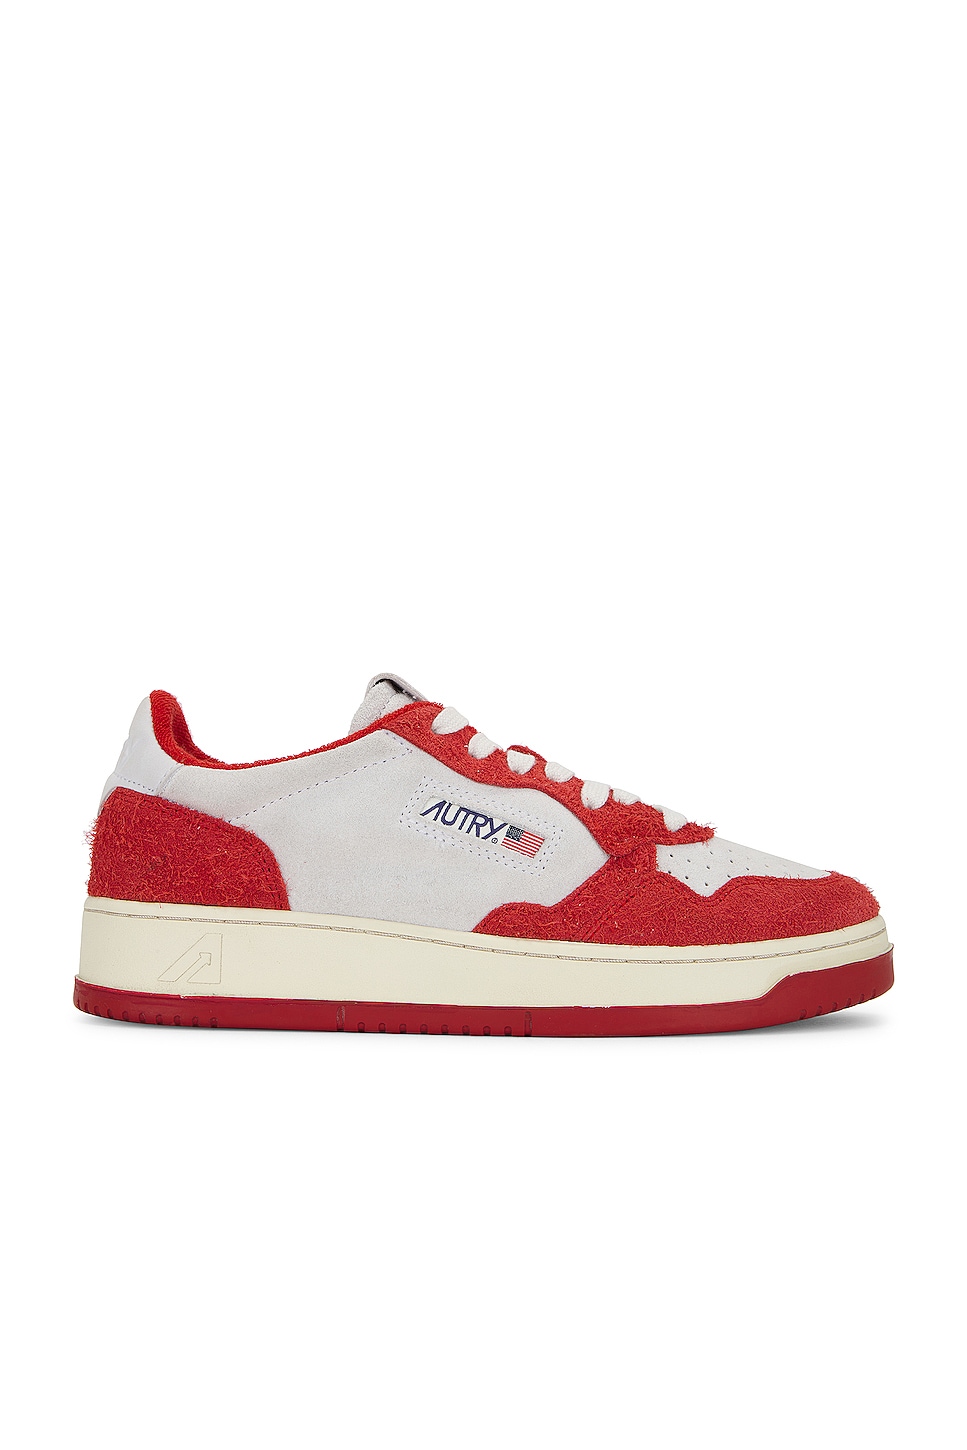 Image 1 of Autry Medalist Low Sneaker in Red